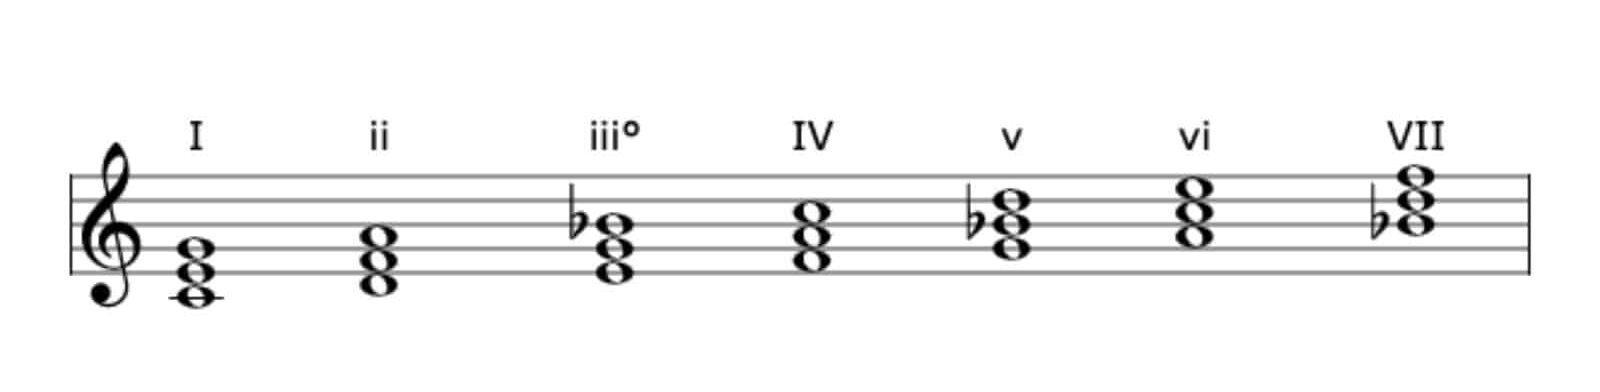 Harmonic analysis of the chords of the Mixolydian mode